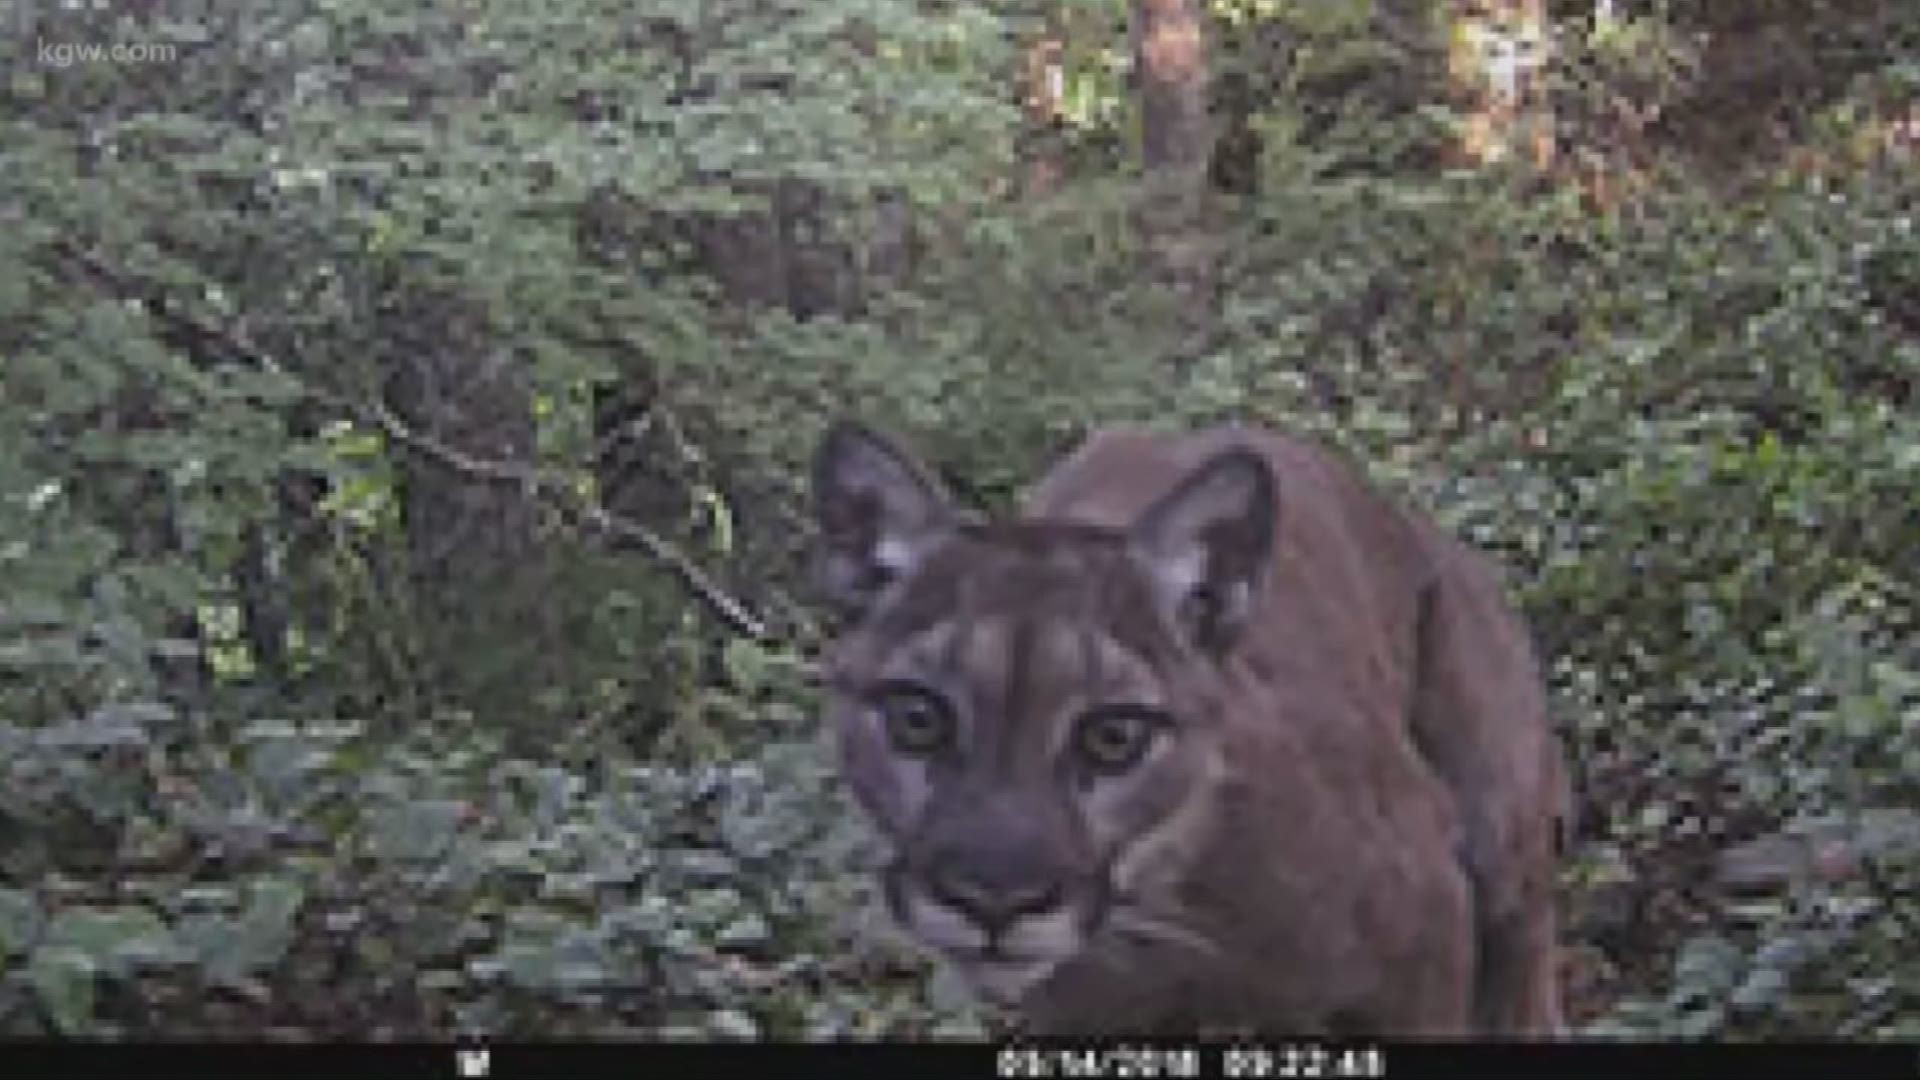 Oregon wildlife officials believe they killed the right cougar.